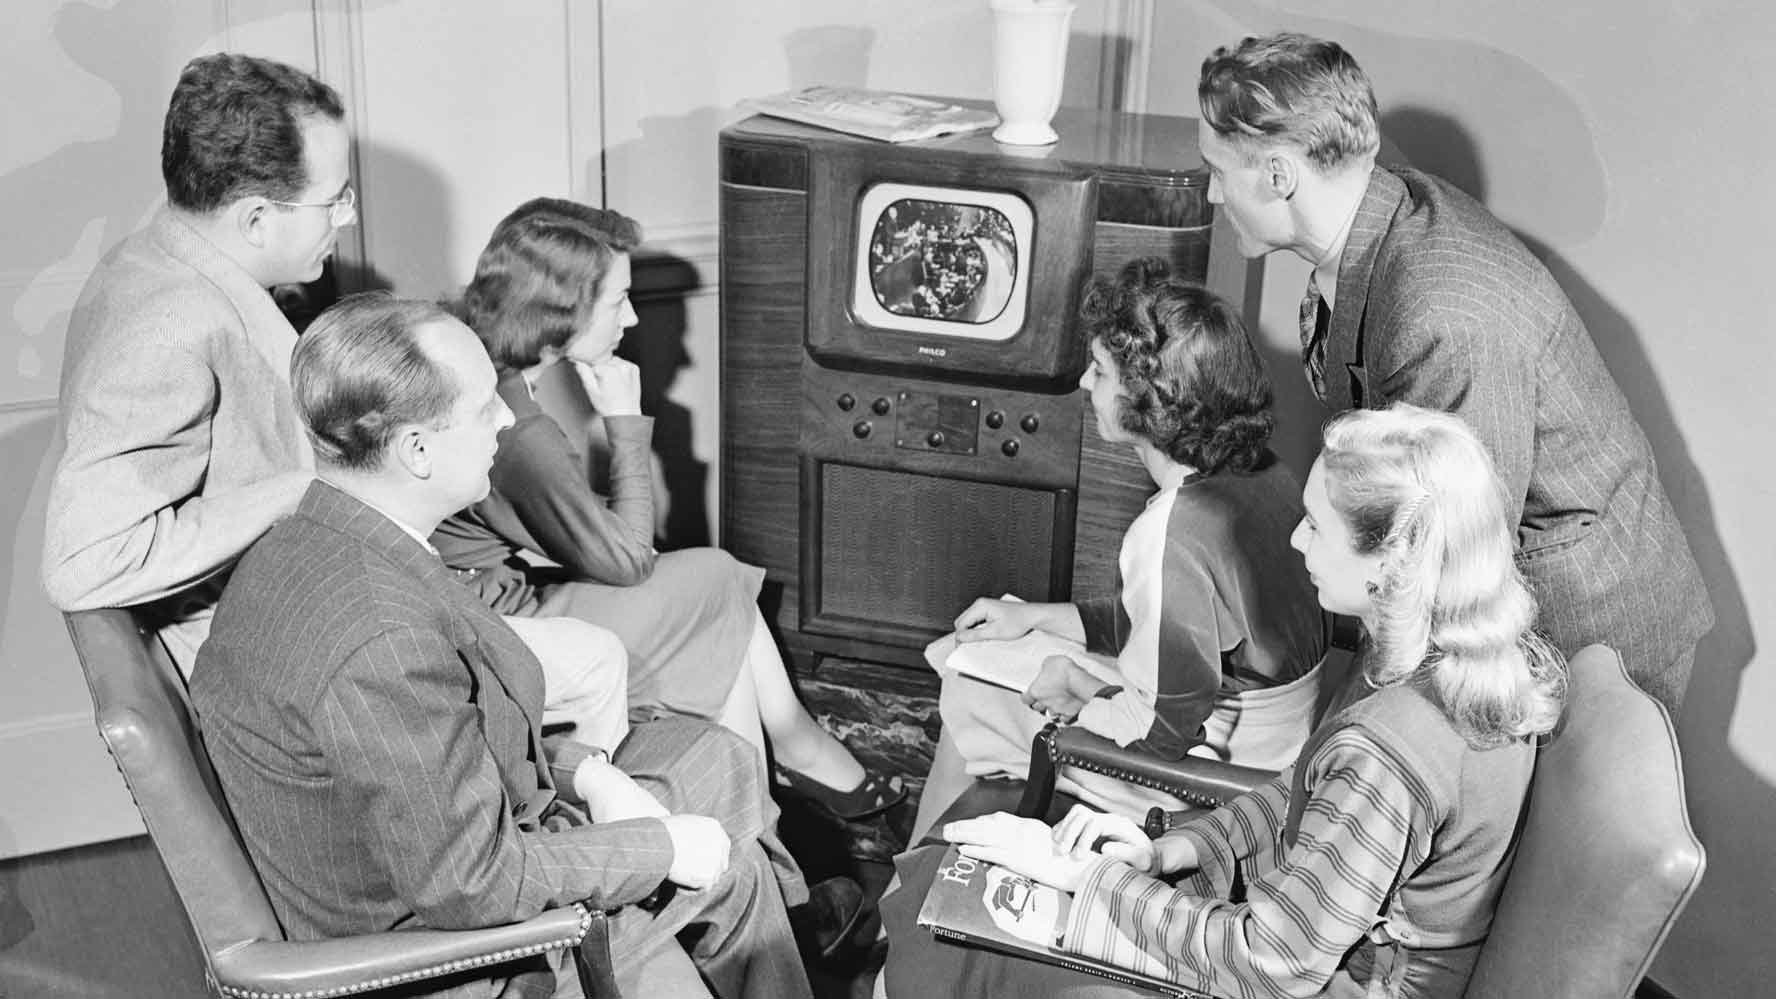 People gathered around a television set.